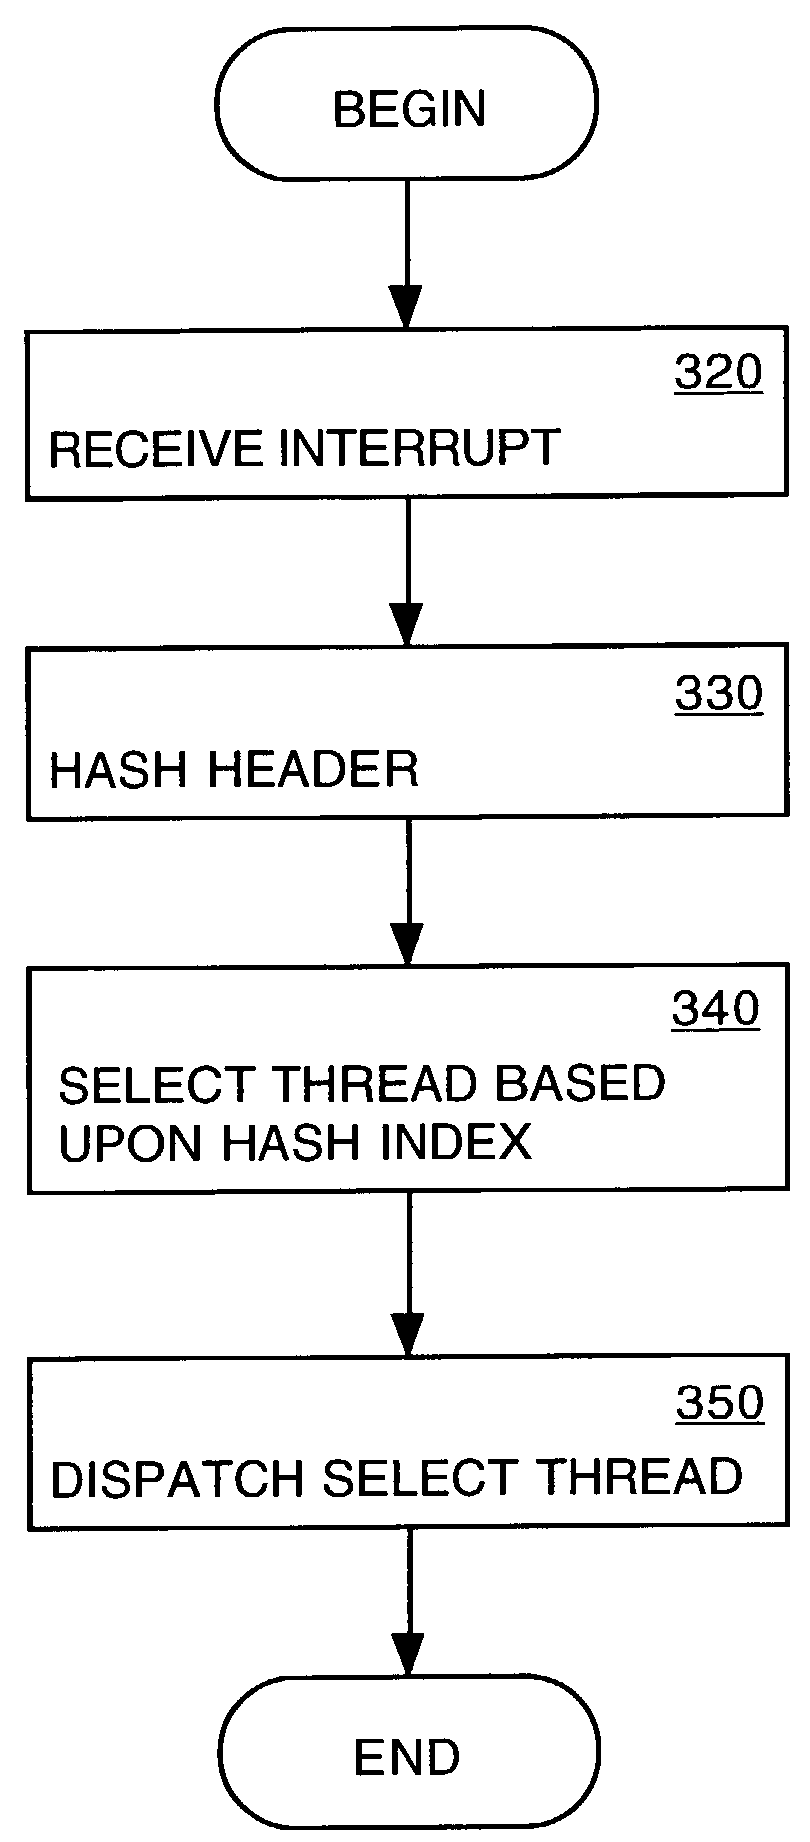 Dynamic allocation of a pool of threads